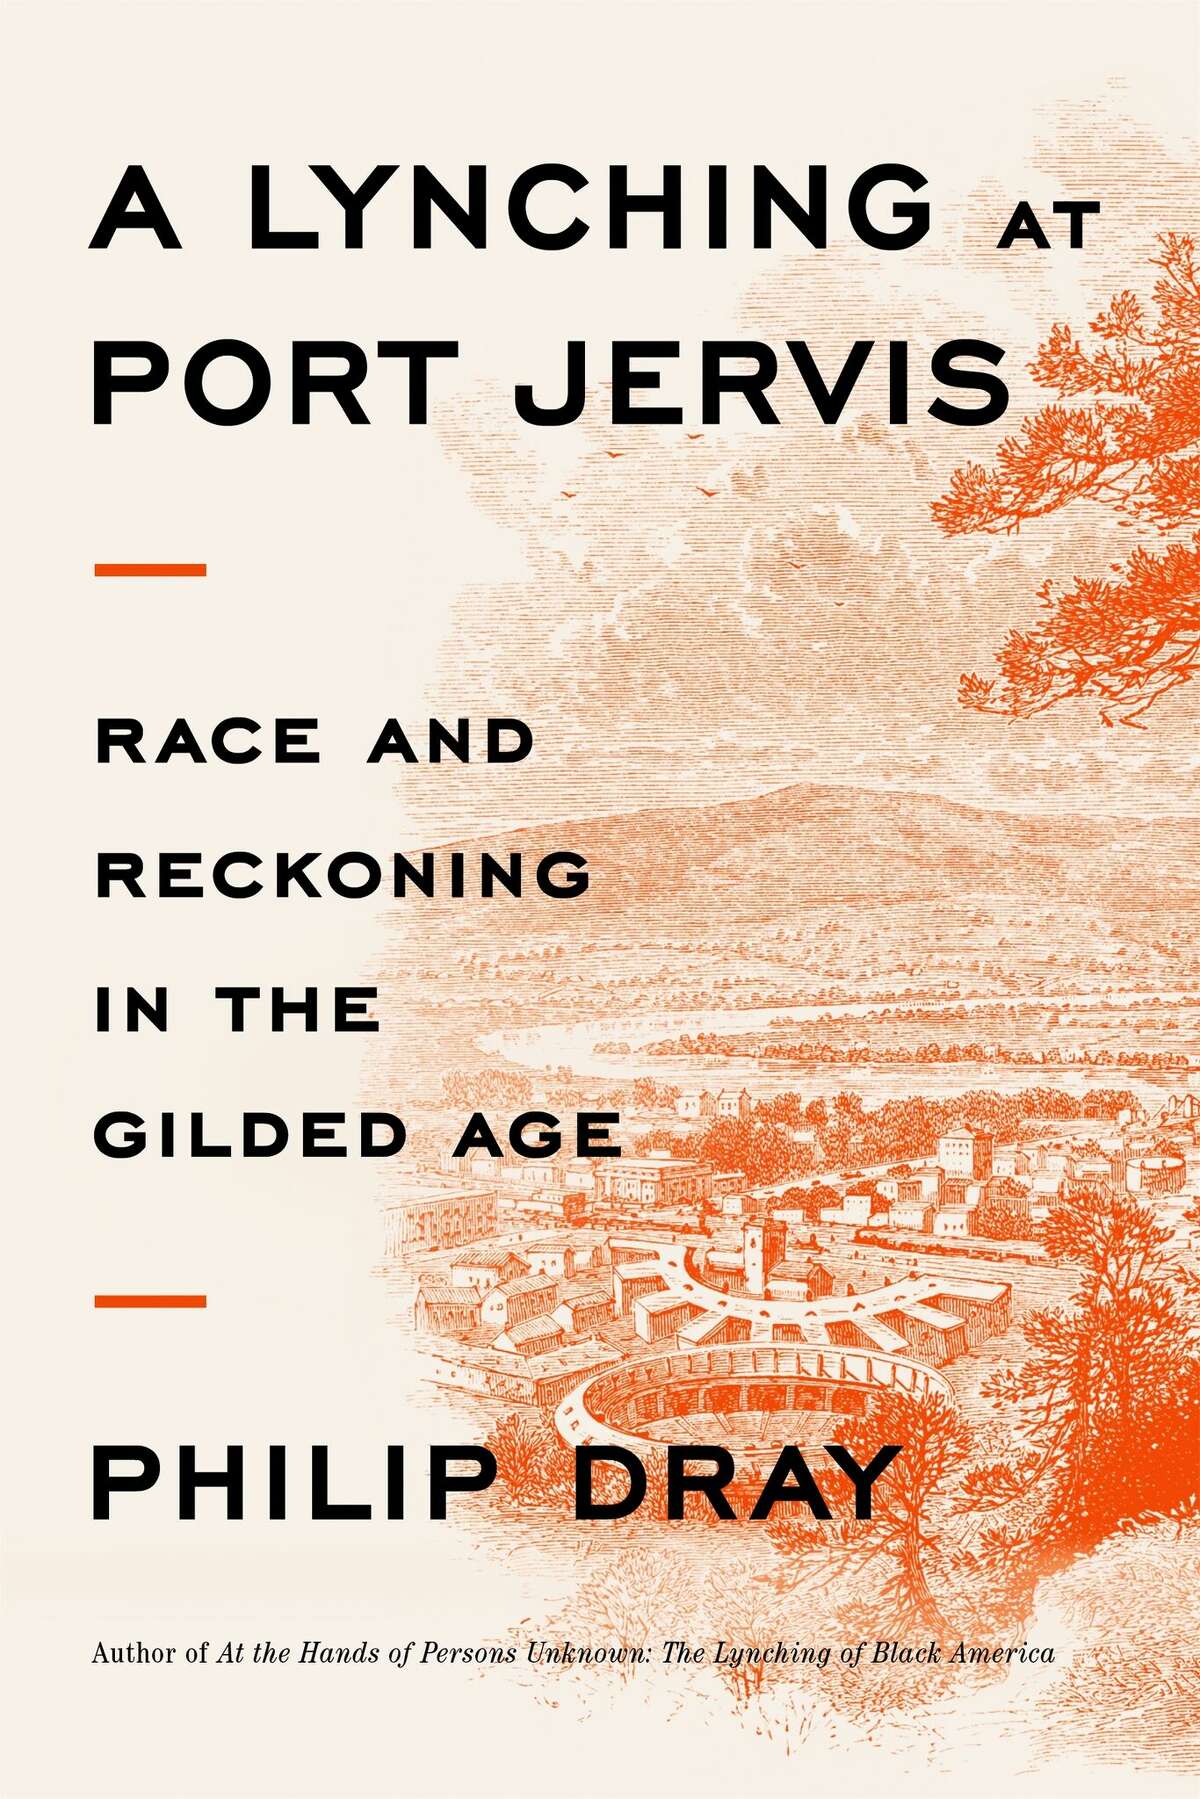 Historian Philip Dray’s latest book, A Lynching in Port Jervis: Race and Reckoning in the Gilded Age, is a detailed account of an 1892 Southern-style lynching of a Black man in Port Jervis.